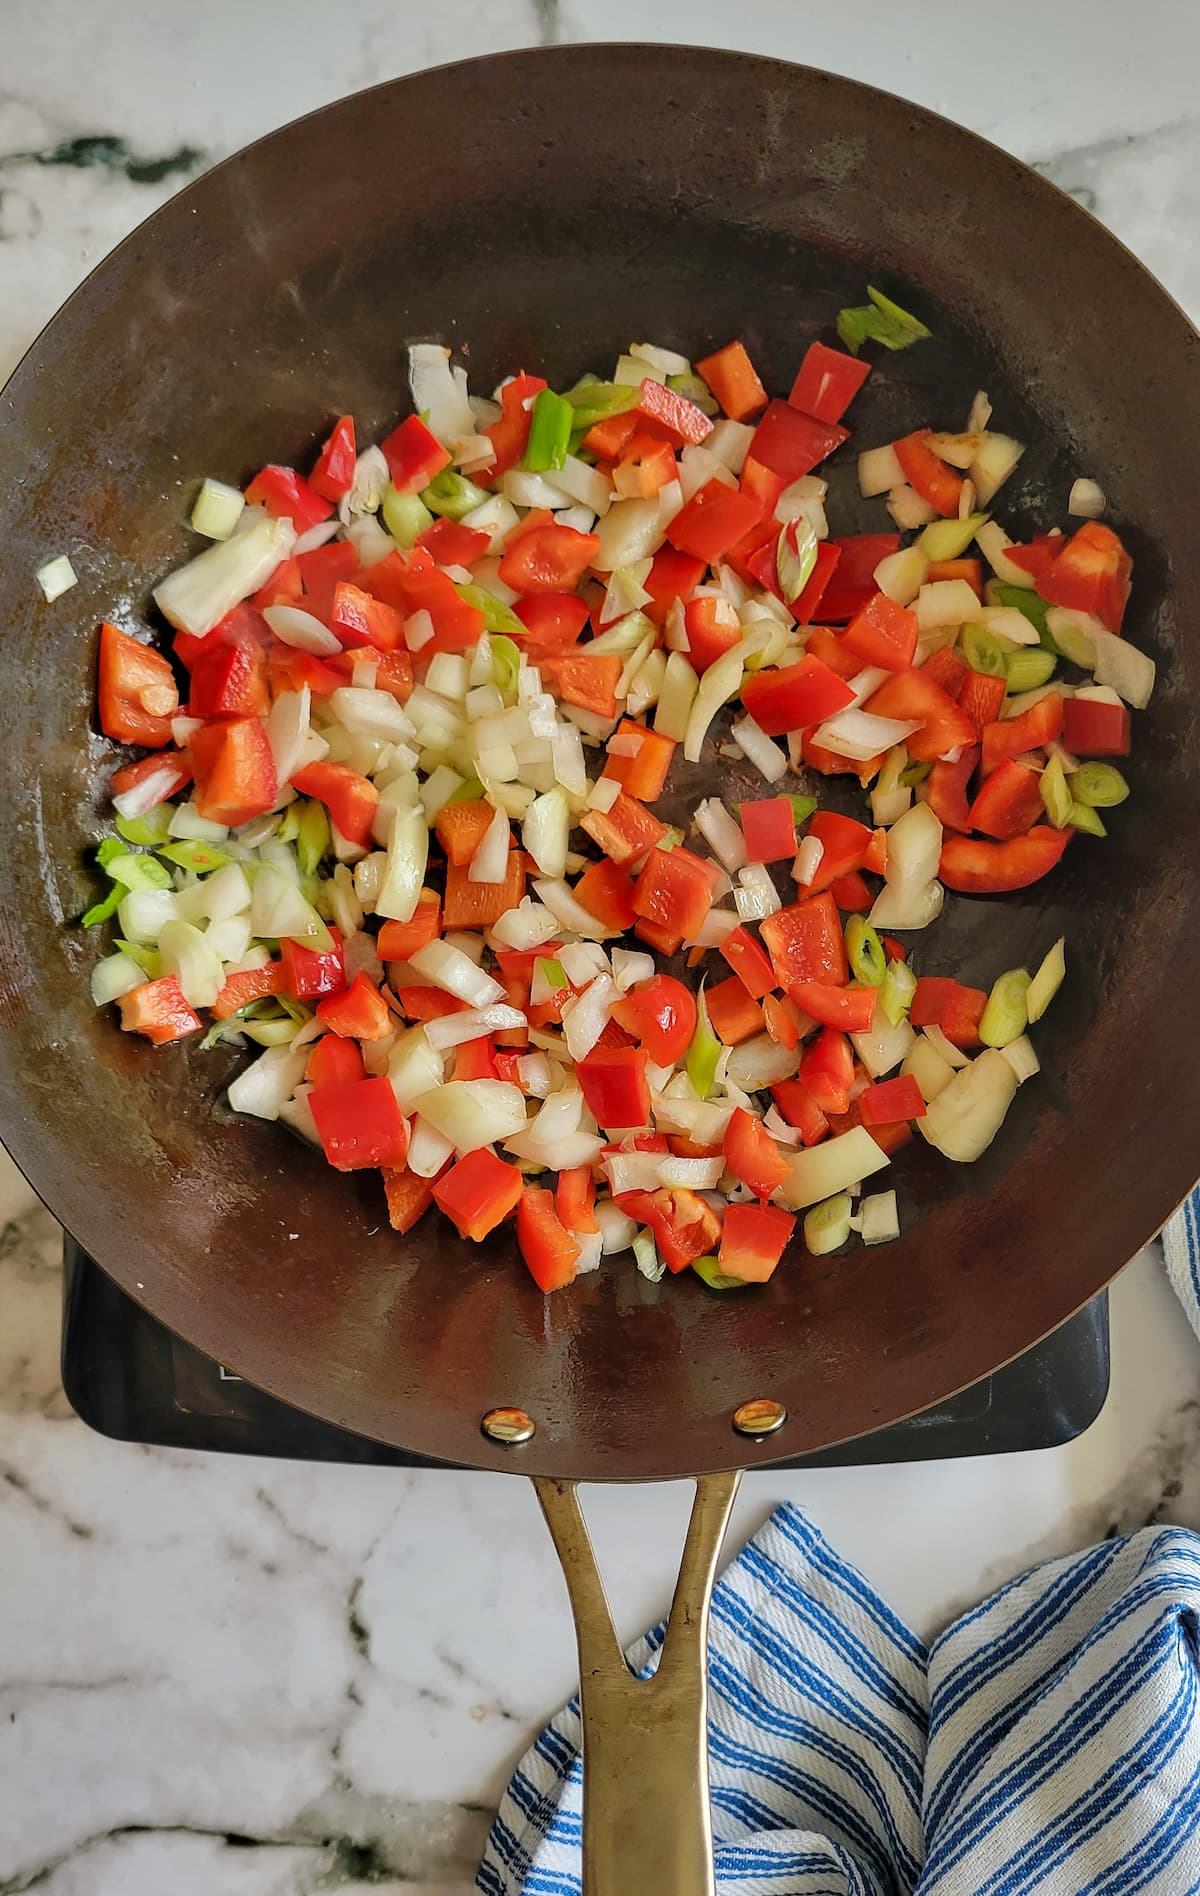 diced white and green onion and red bell pepper in a skillet